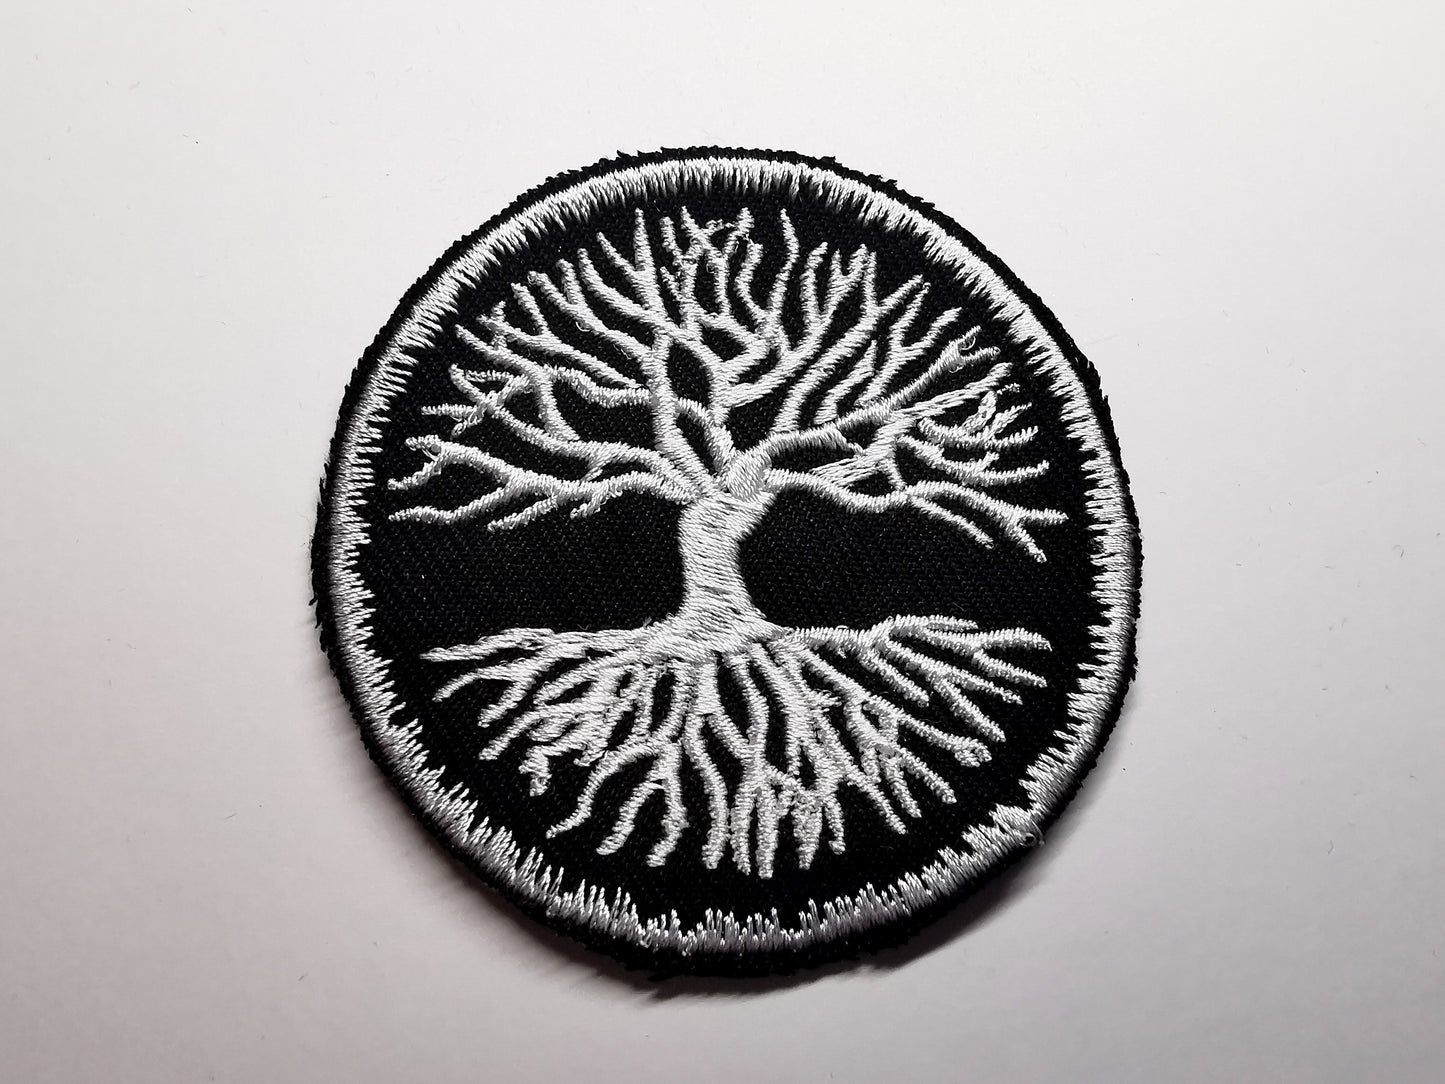 Yggdrasil Tree of Life Embroidered Patch White and Snowy Border